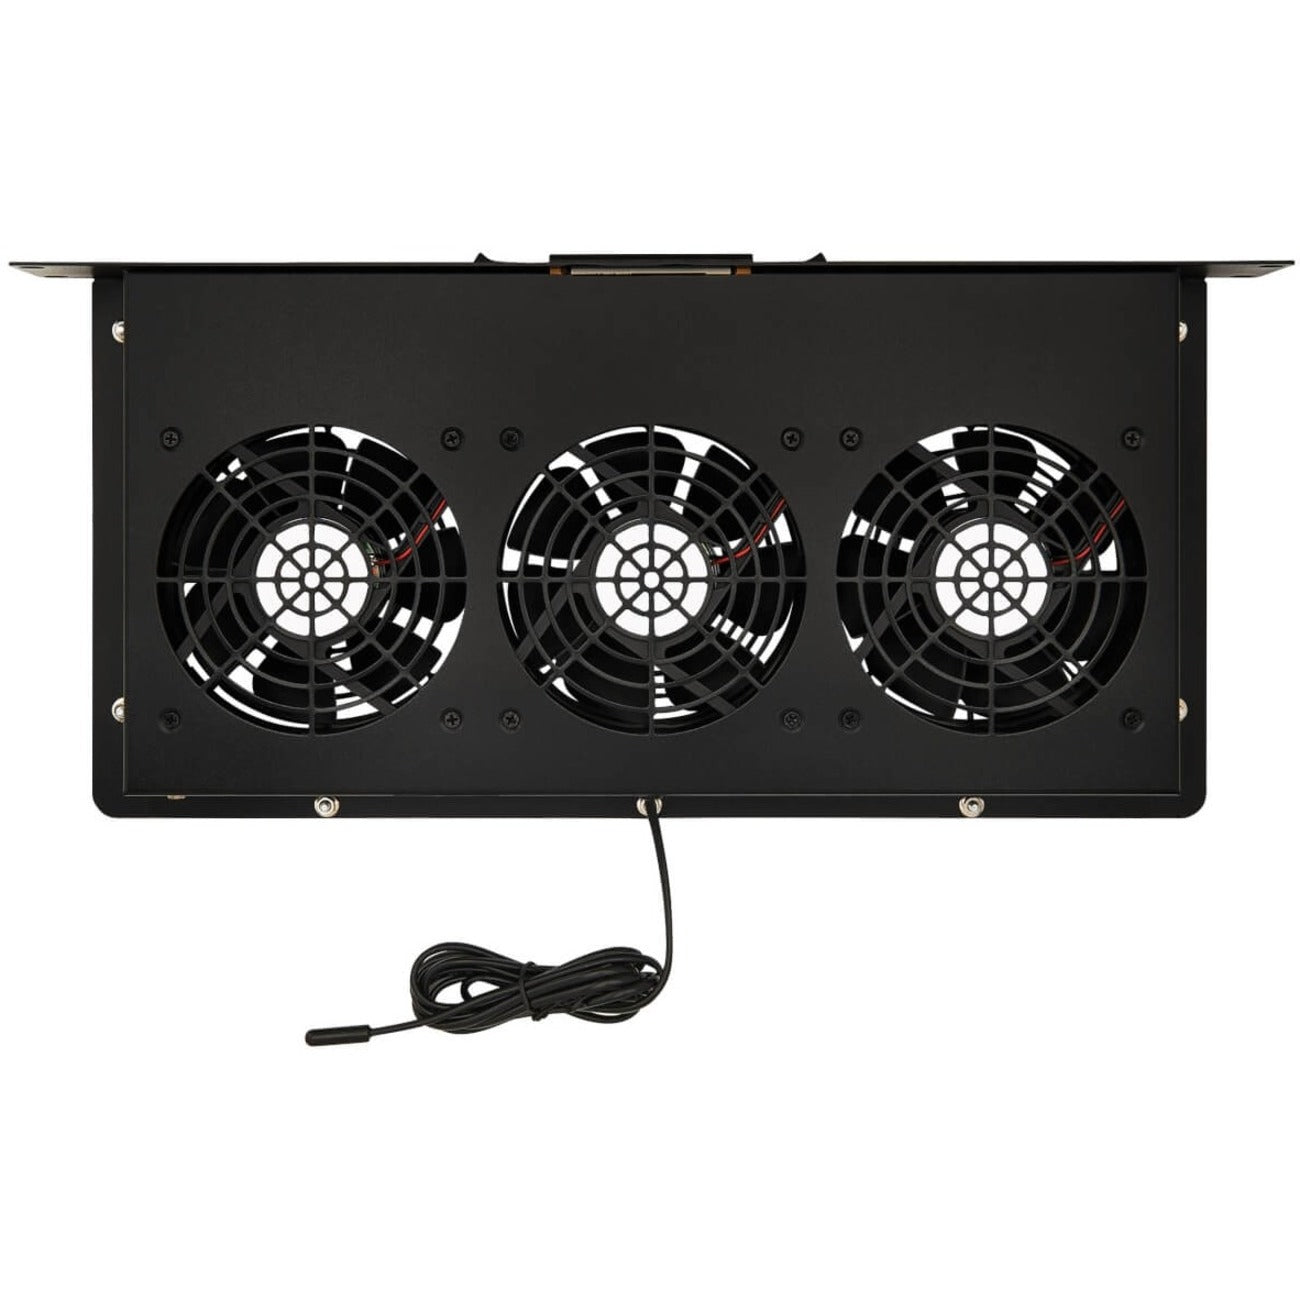 Tripp Lite SRFAN1UTEMP 1U Blanking Panel with Temperature Sensor and High-Performance Fans, Enhance Cooling and Efficiency